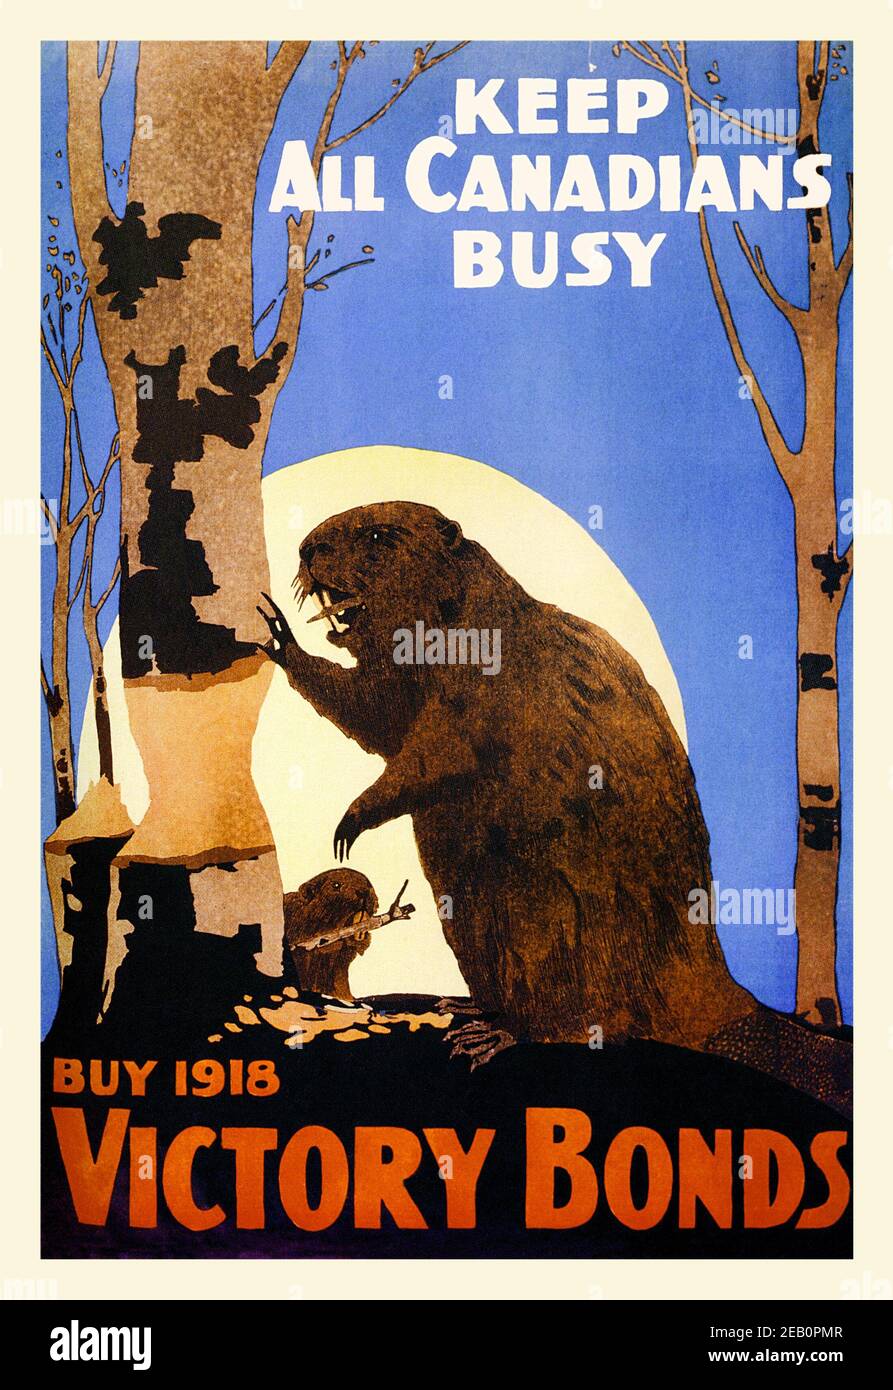 Keep All Canadians Busy 1918 Stock Photo